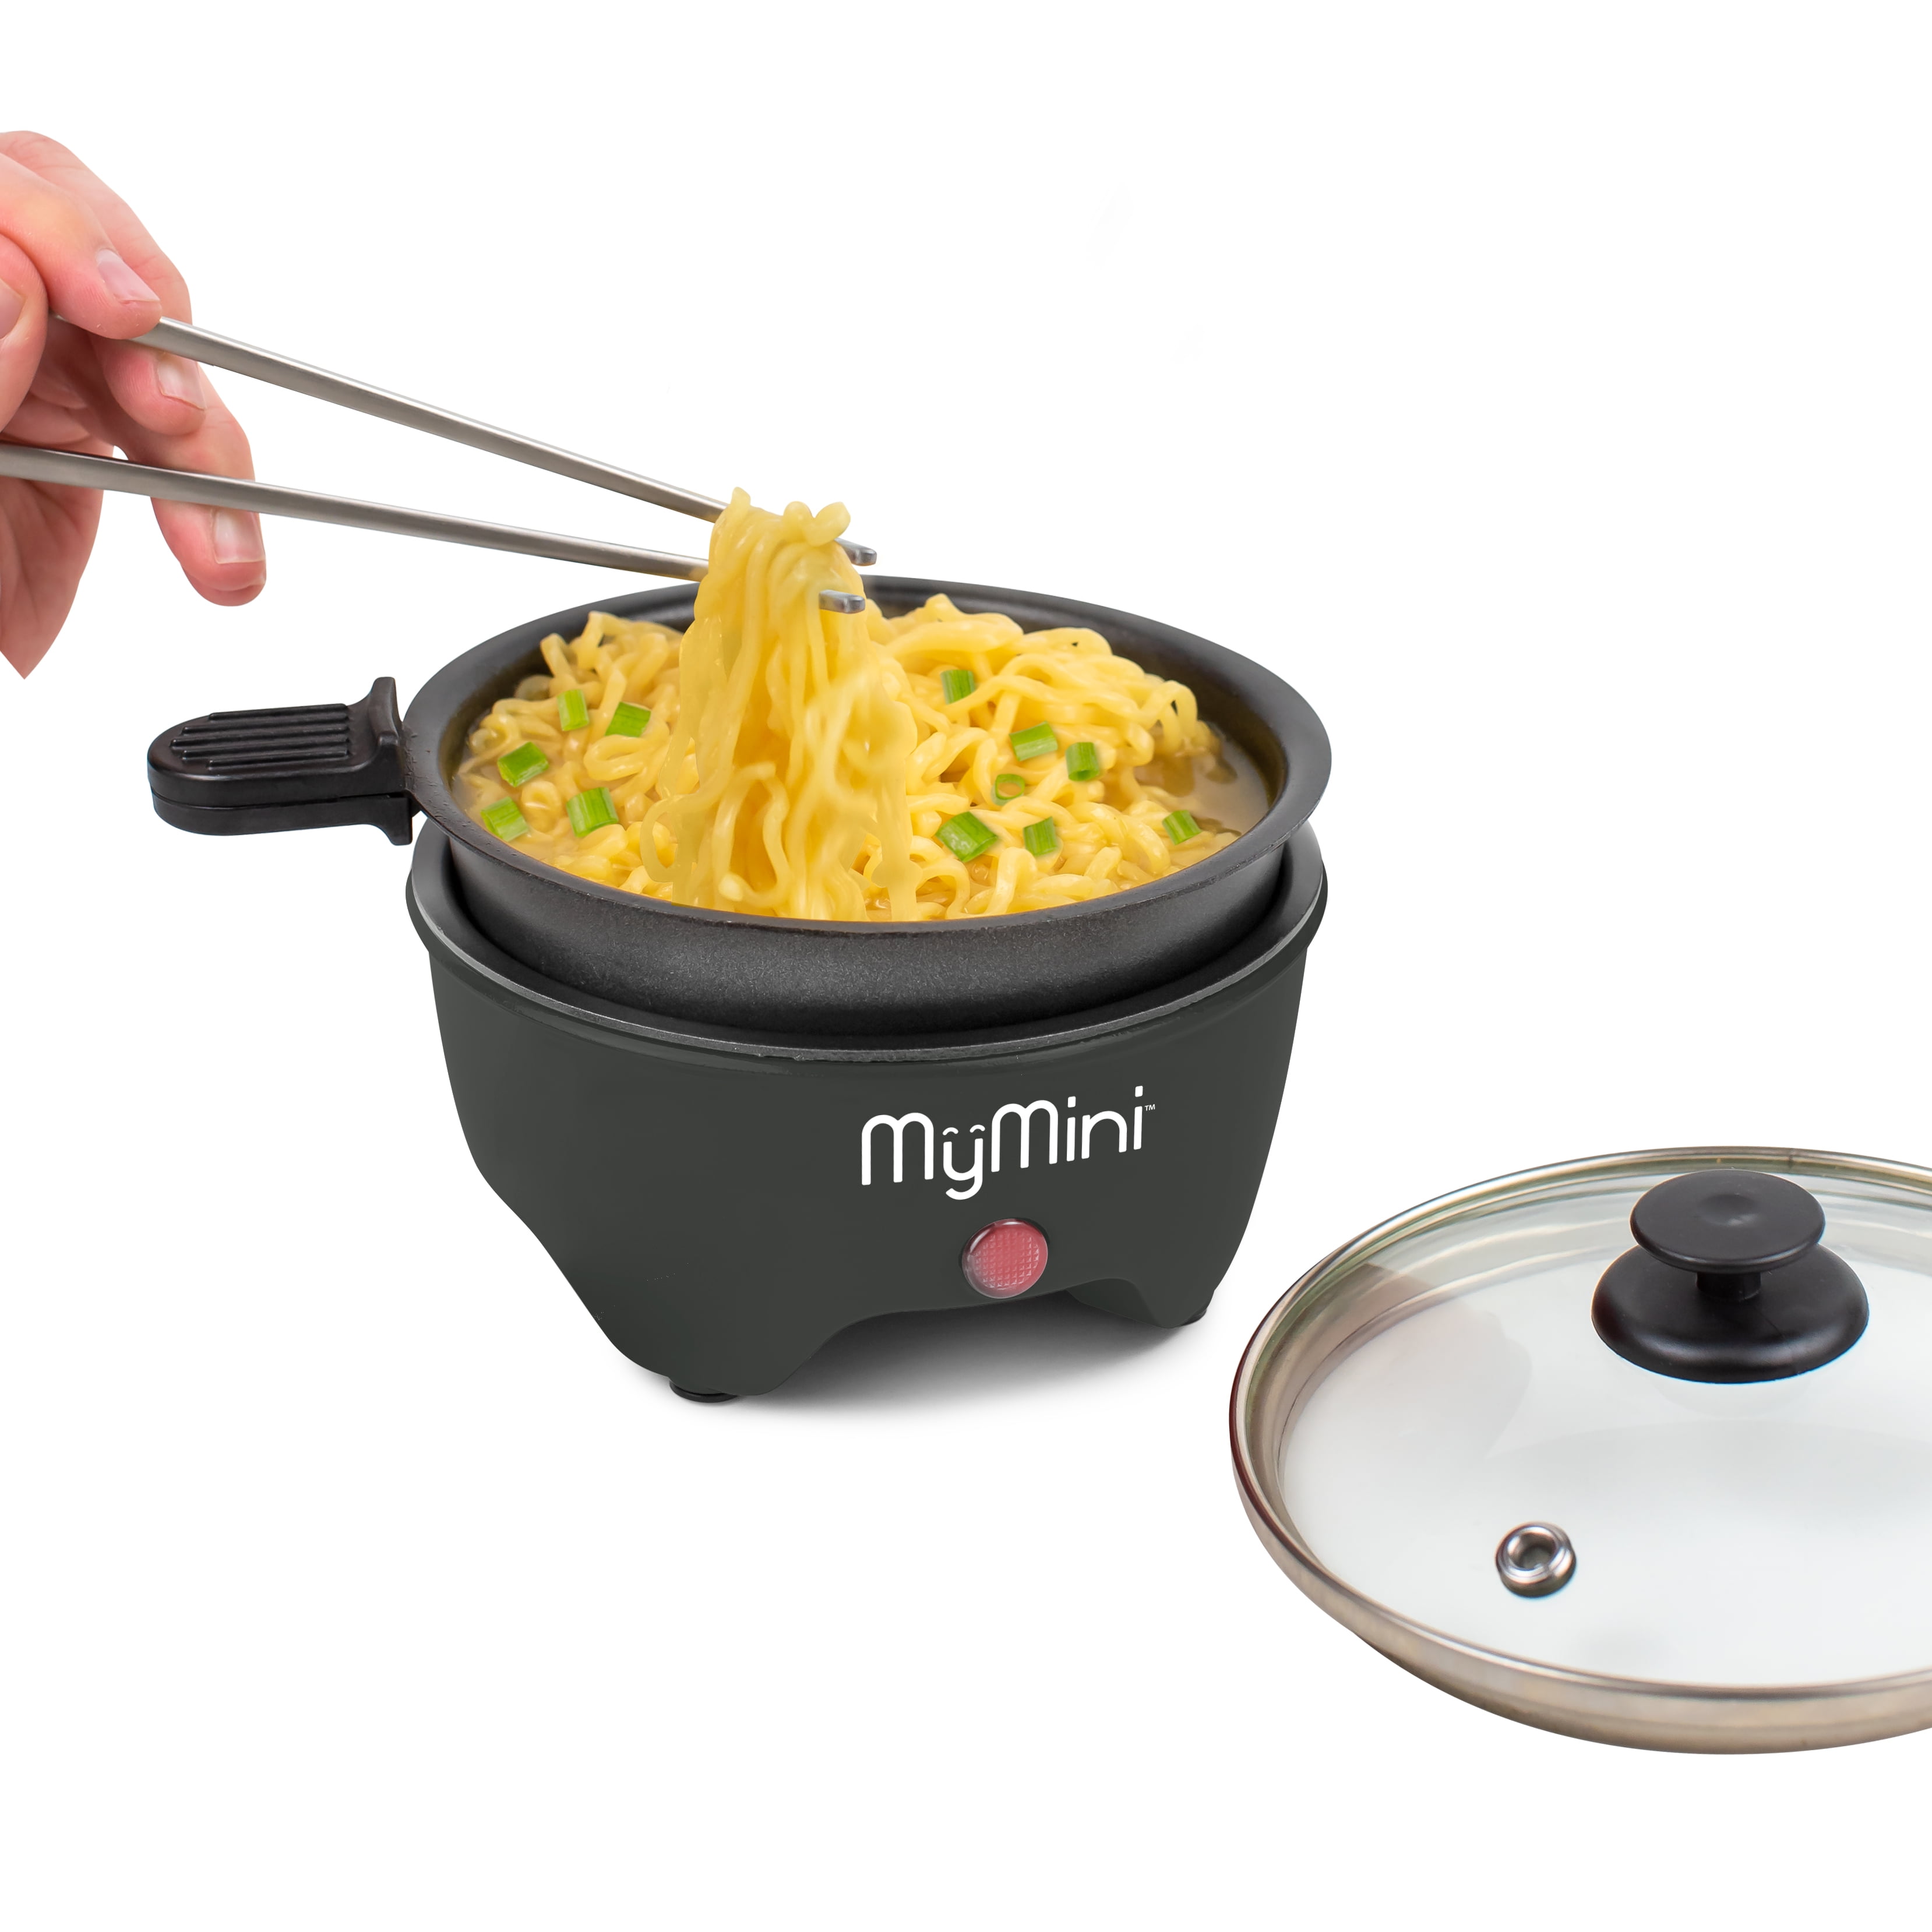 Cooker and Skillet 5” inch MyMini Noodle - Black NEW, Non-Stick, 260 Watts